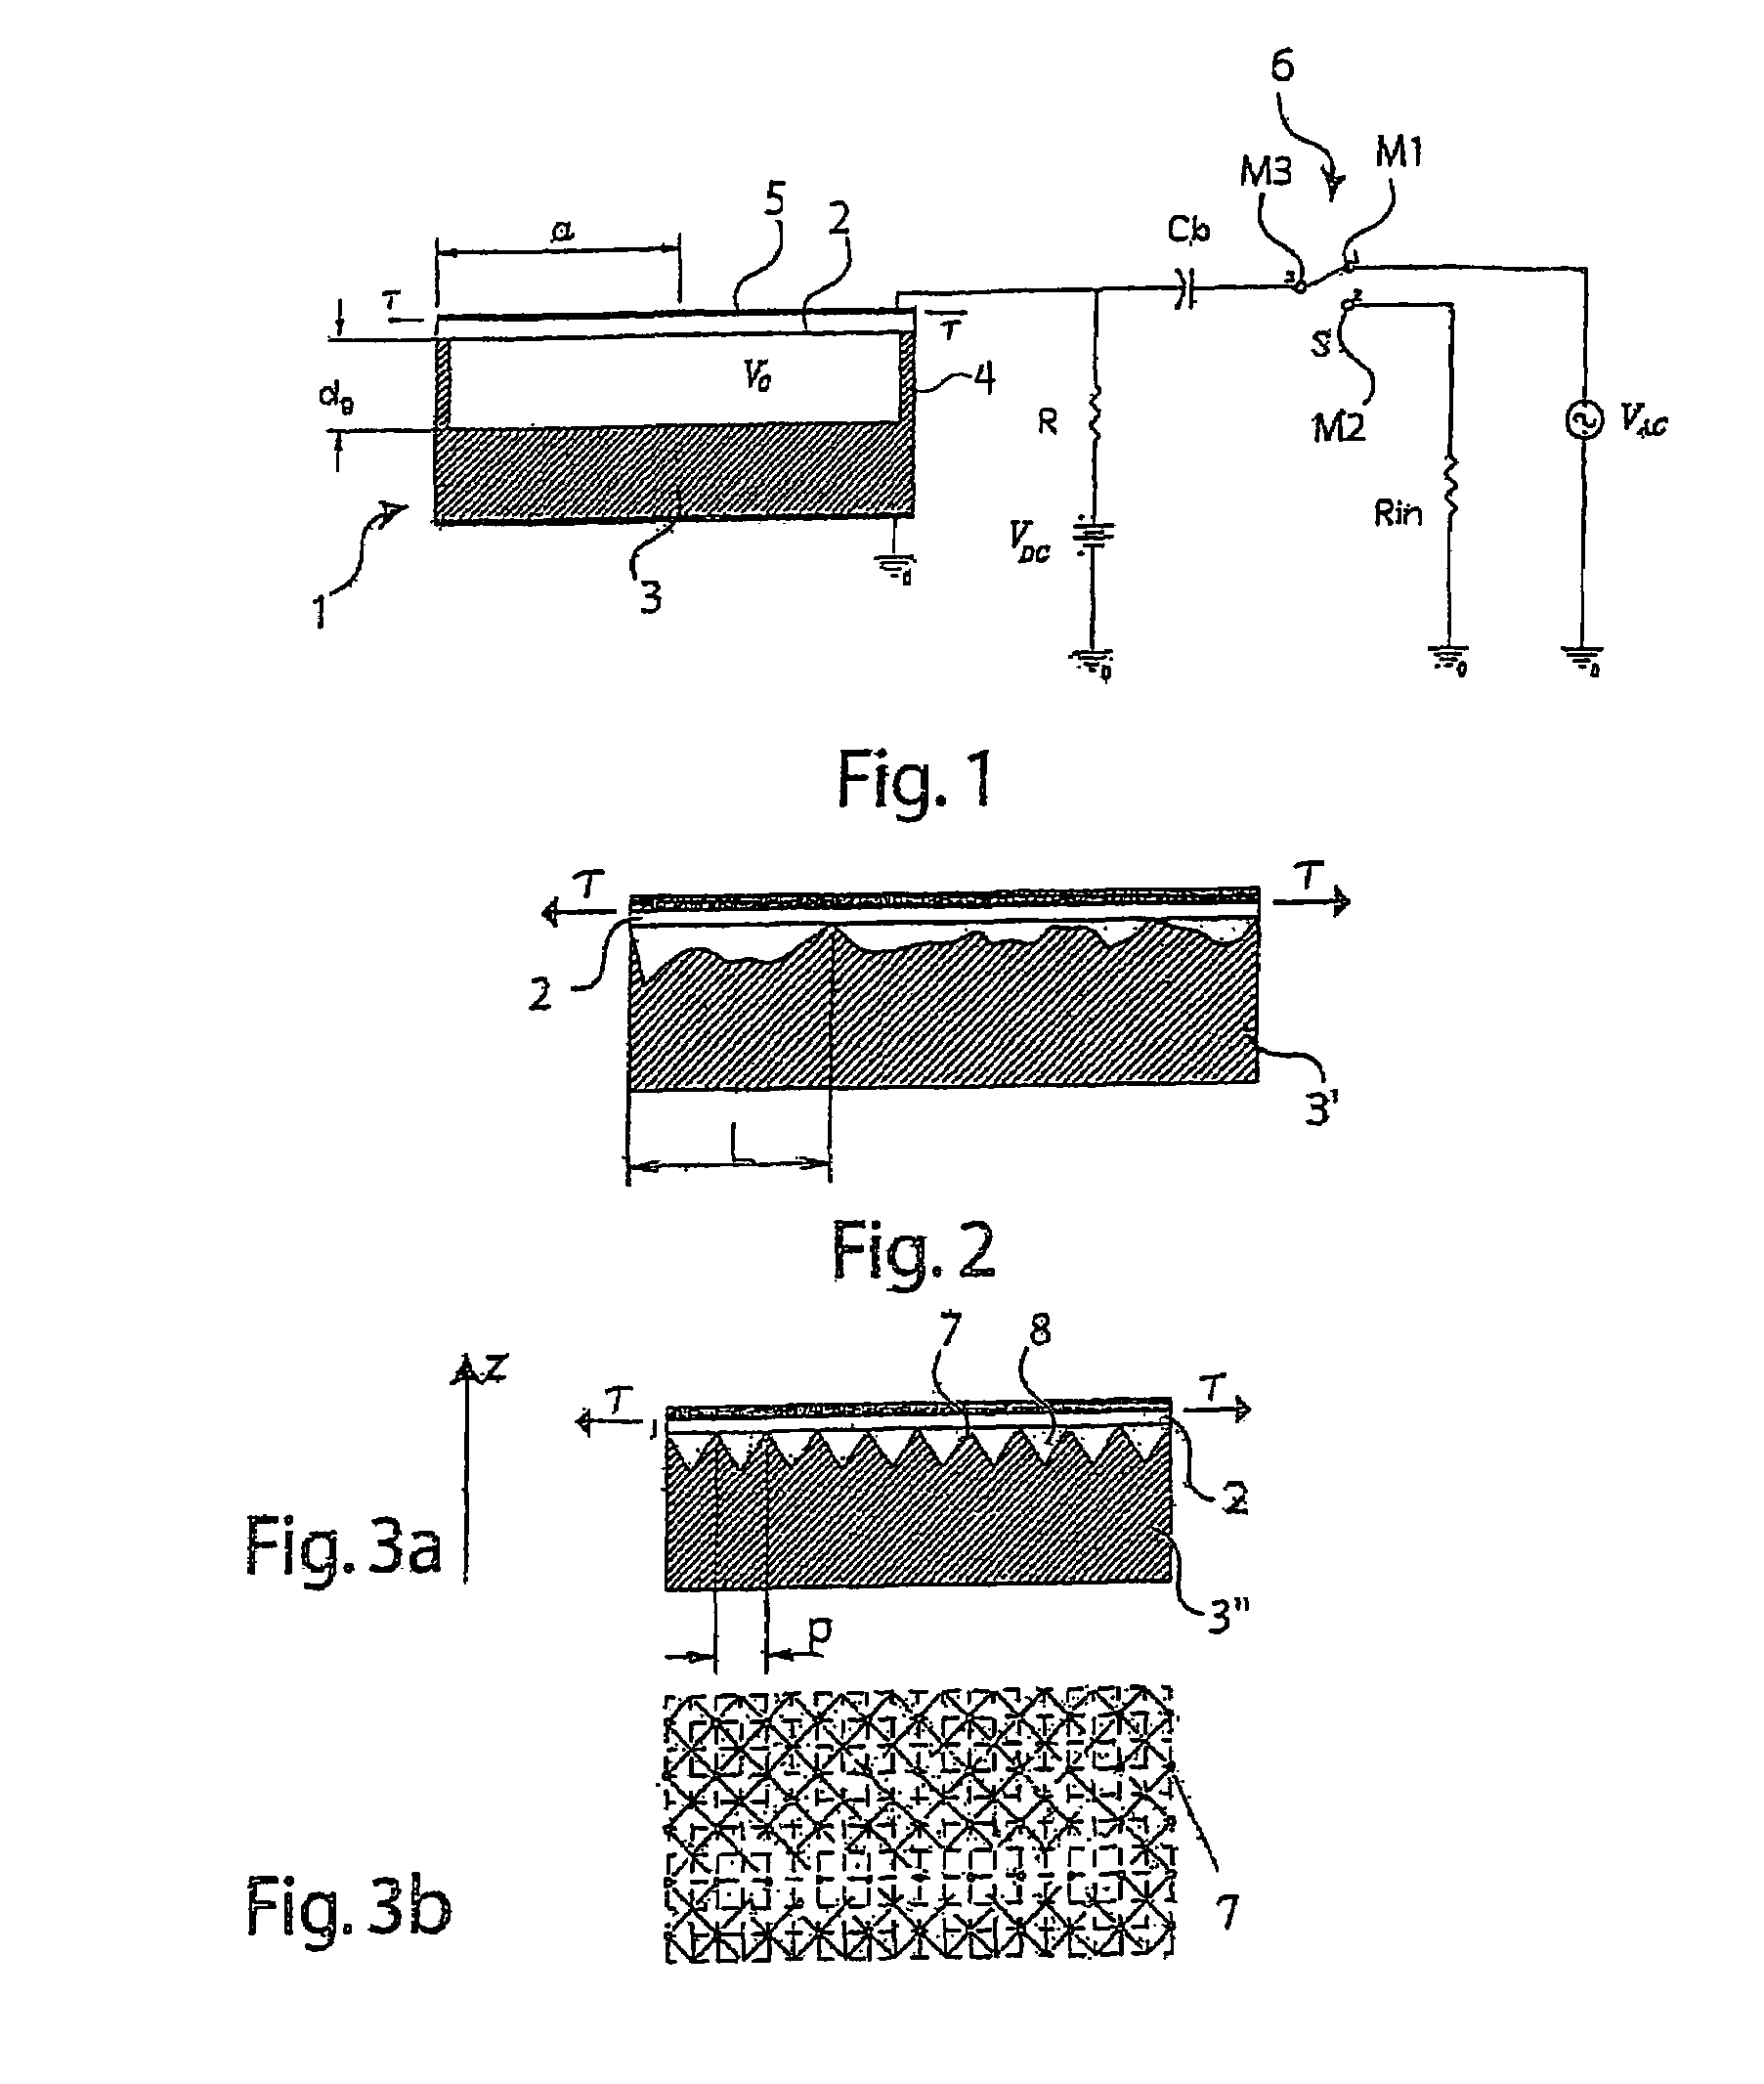 Microfabricated capacitive ultrasonic transducer for high frequency applications